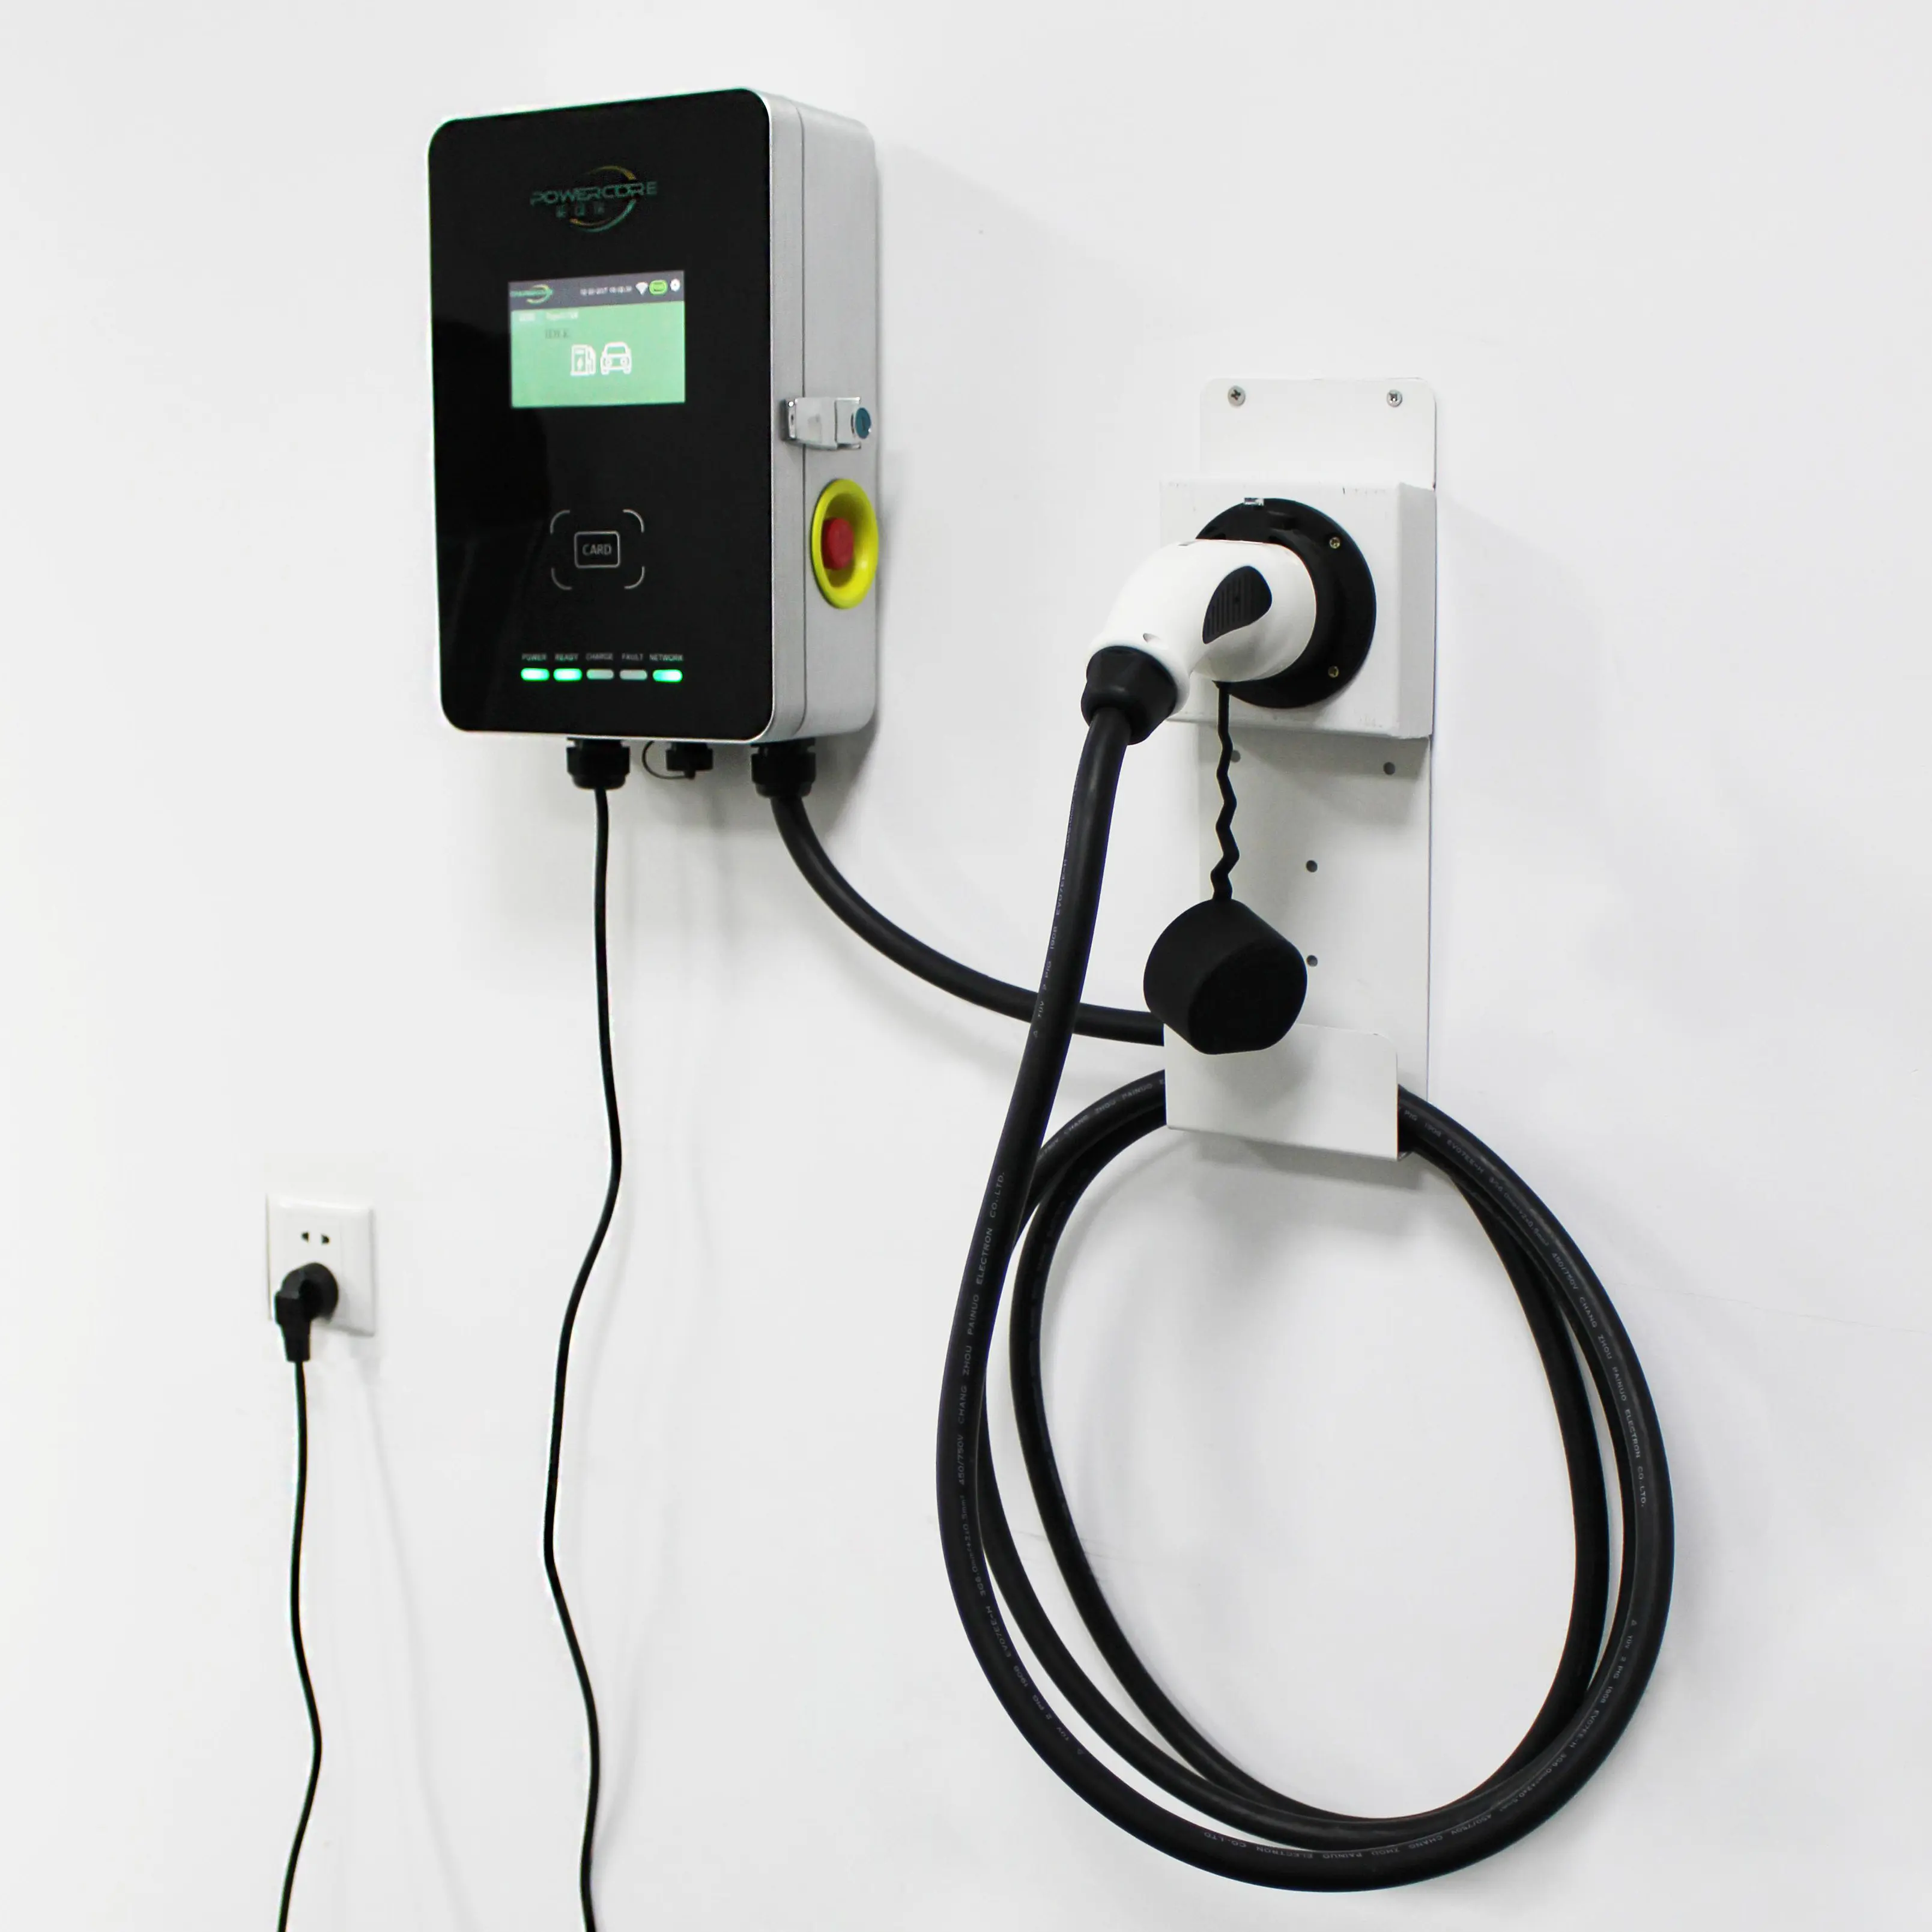 Ac Ev Charging Station 22kw Wall-mounted Ev Chargering AC Wallbox Ev Charging Station With Type Plug Ocpp 1.6 With RFID Card Home Use